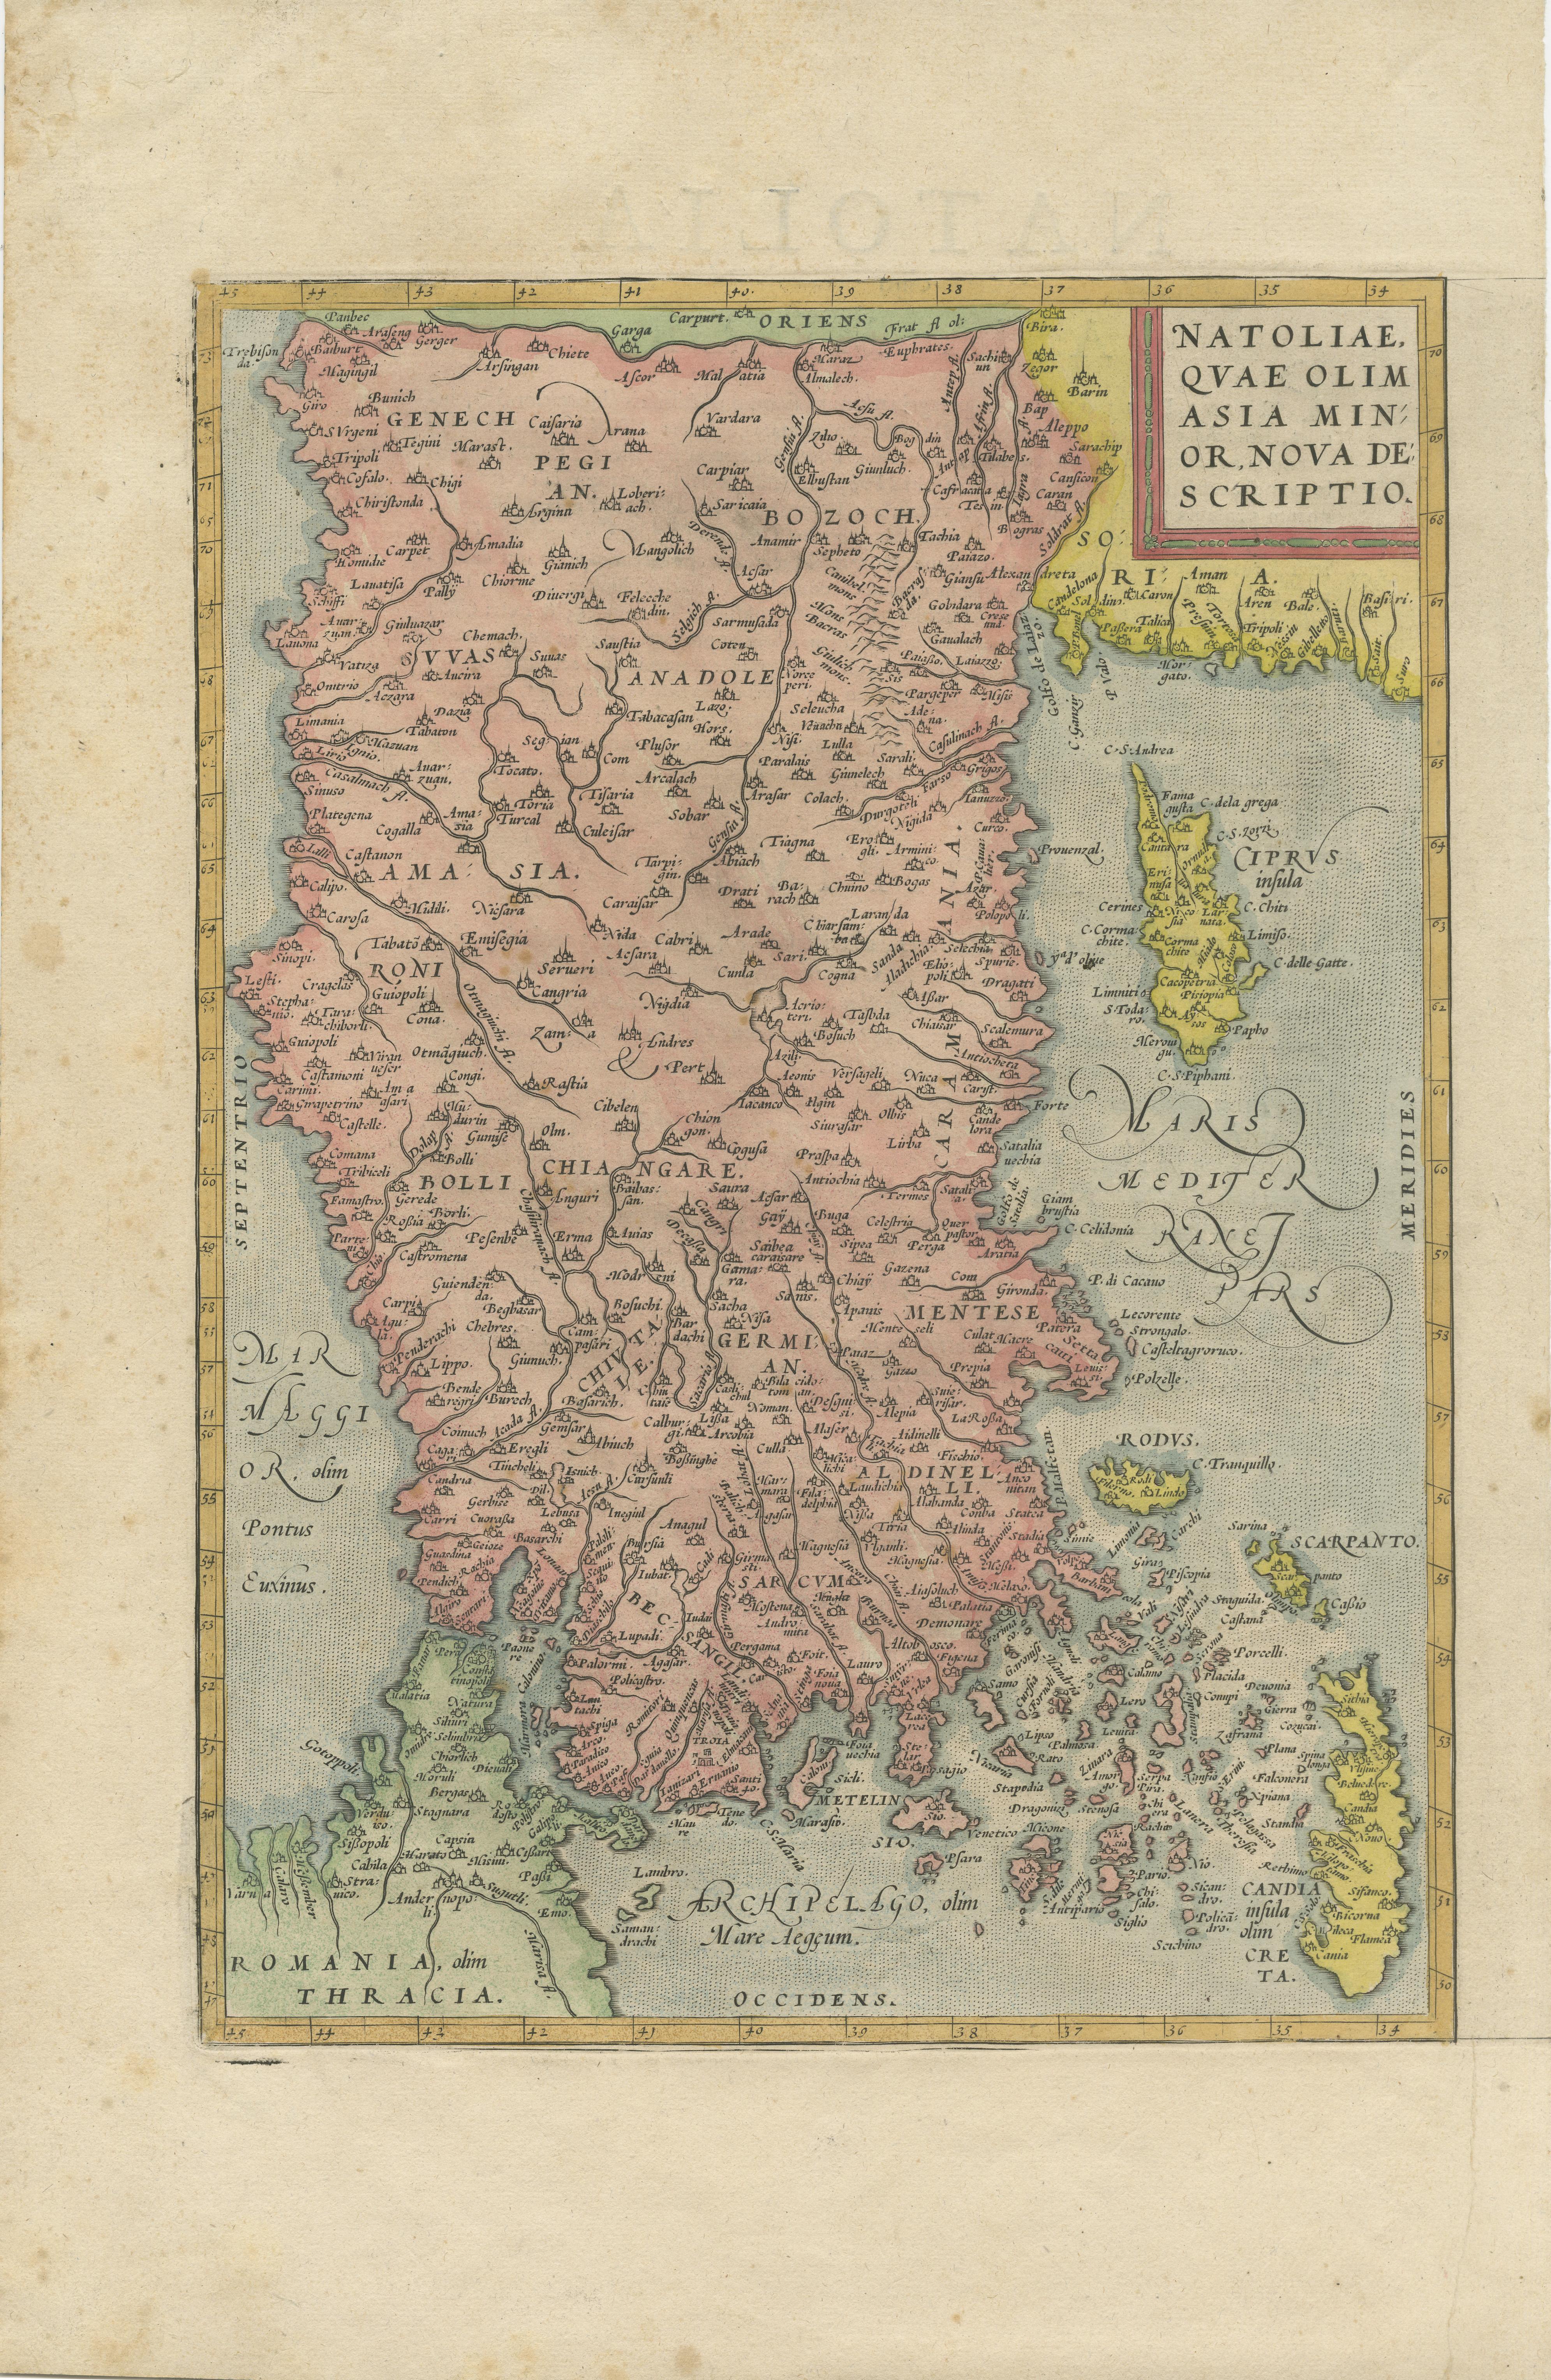 Antique map titled 'Natoliae quae olim Asia Minor nova descriptio'. Original antique map of Asia Minor, Cyprus, and the eastern Mediterranean. Originally published on one sheet together with two other maps (Egypt and Carthage), this print is